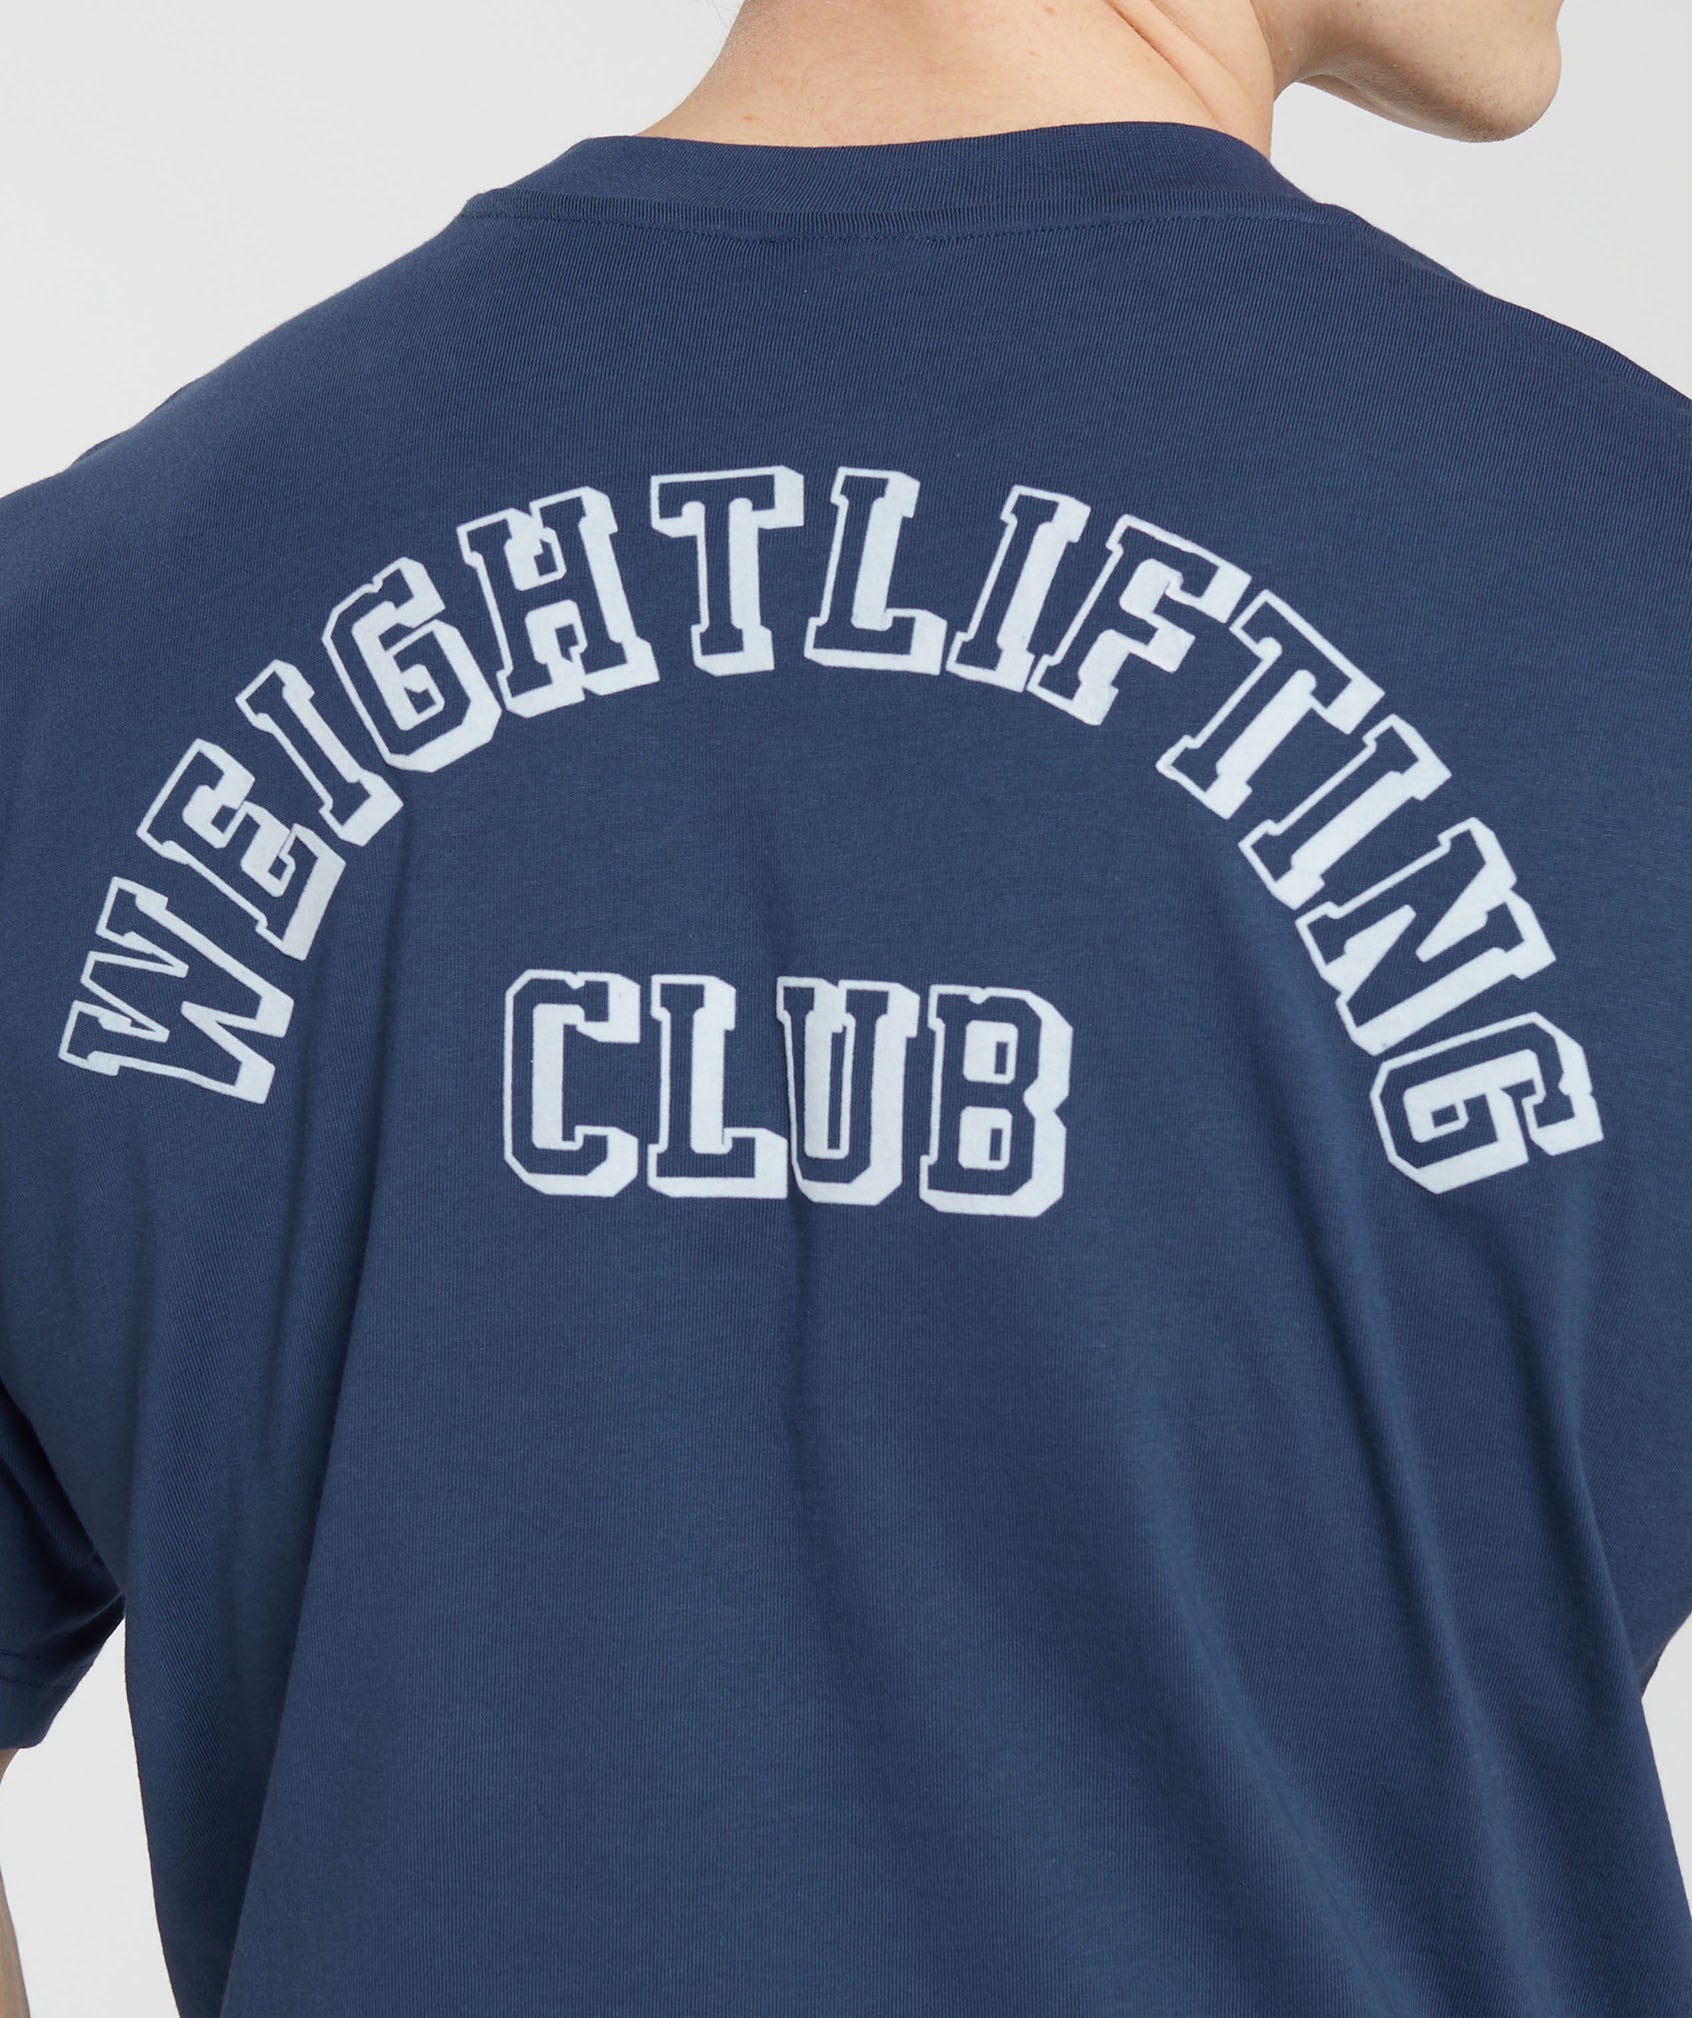 Weightlifting Club T-Shirt in Ash Blue - view 4